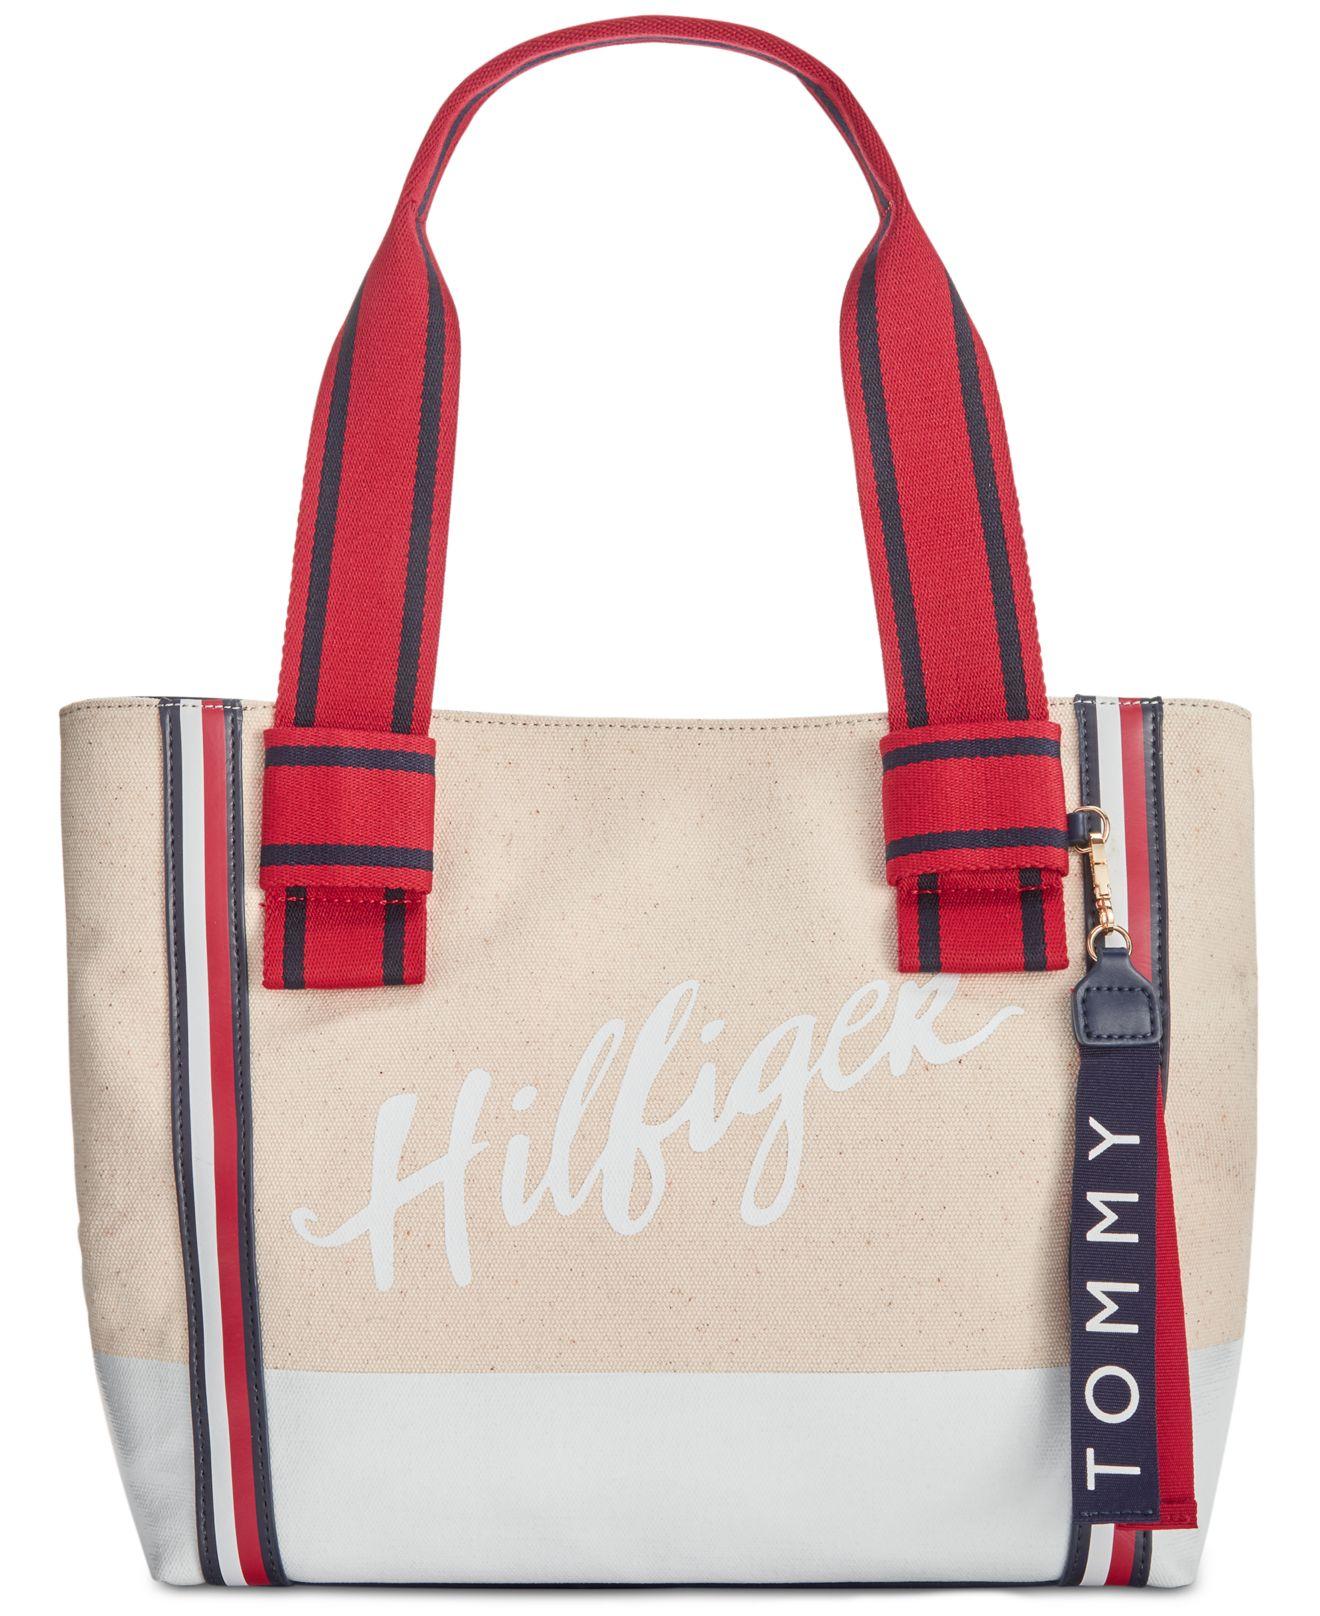 Tommy Hilfiger Canvas Tote Deals, 60% OFF | www.aboutfaceandbody.net